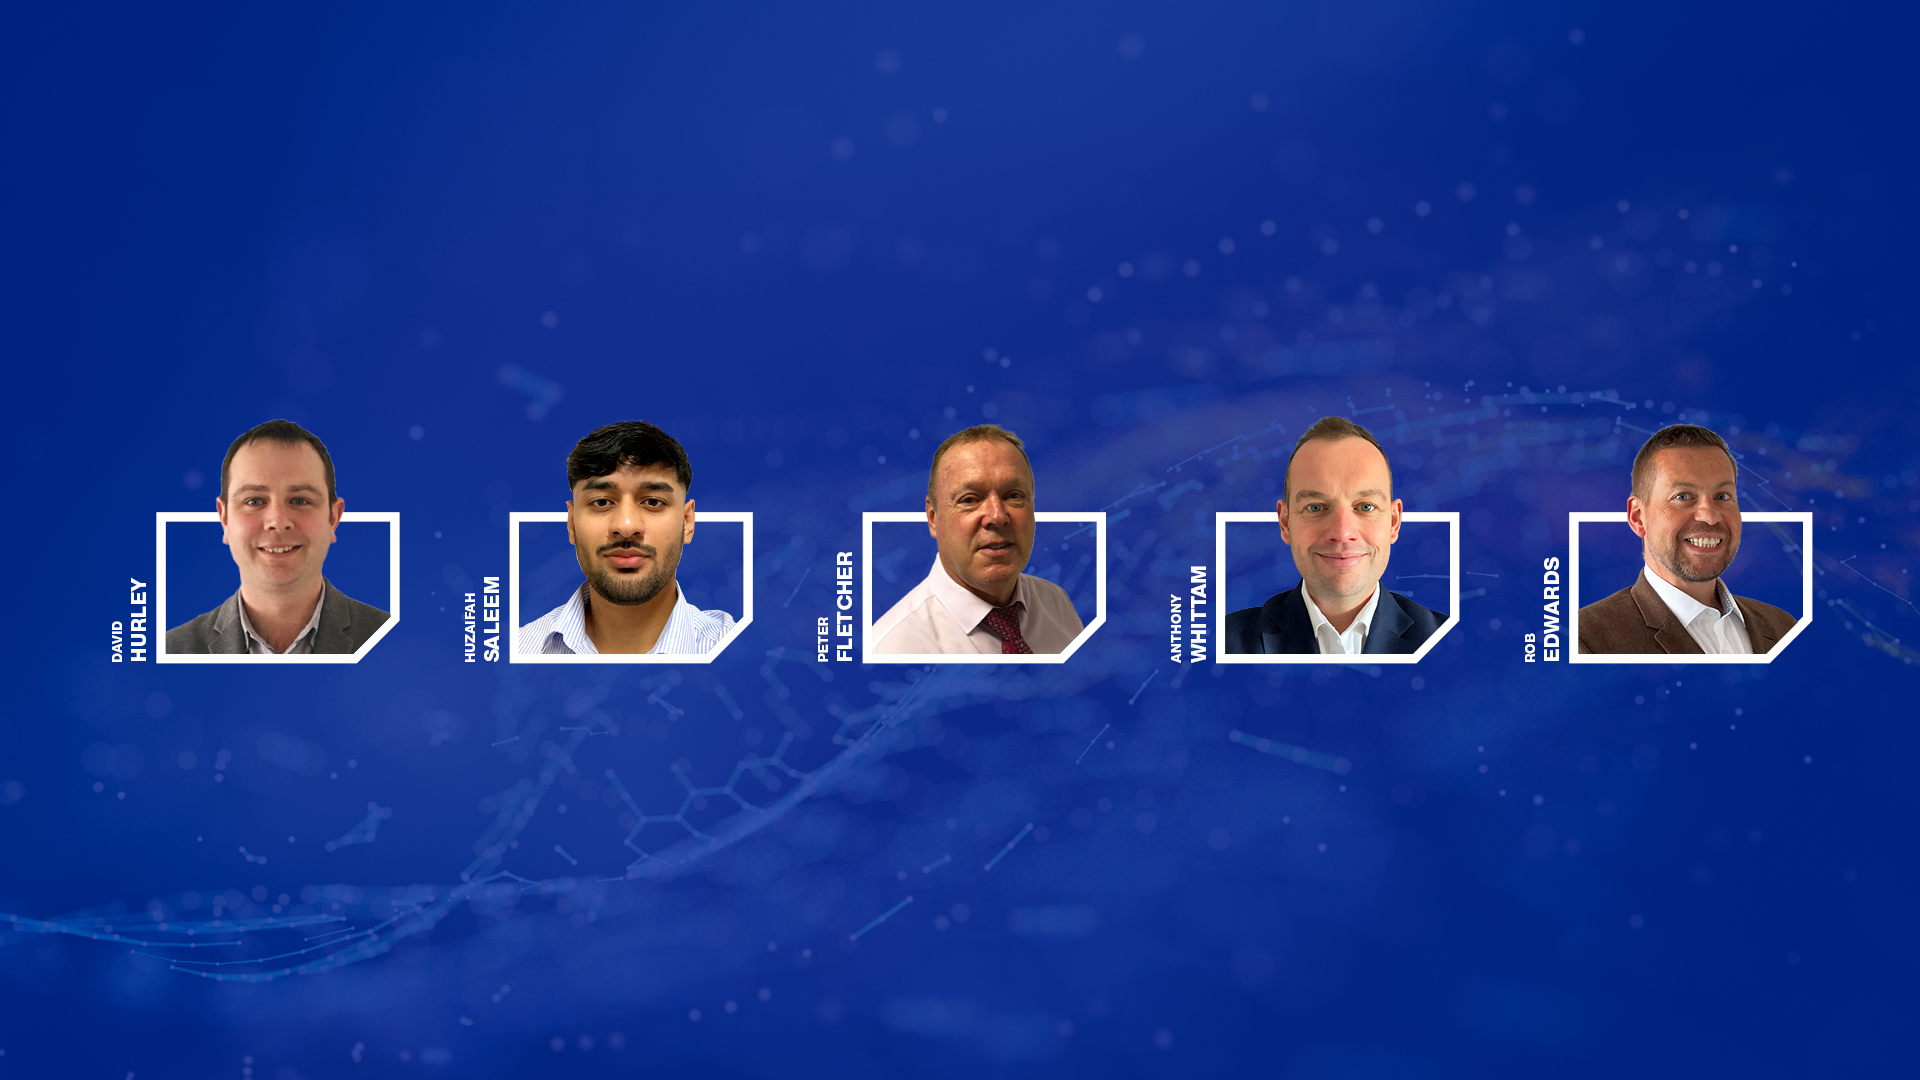 Meet the AVK UK Smart Water Team. Technical and product experts.